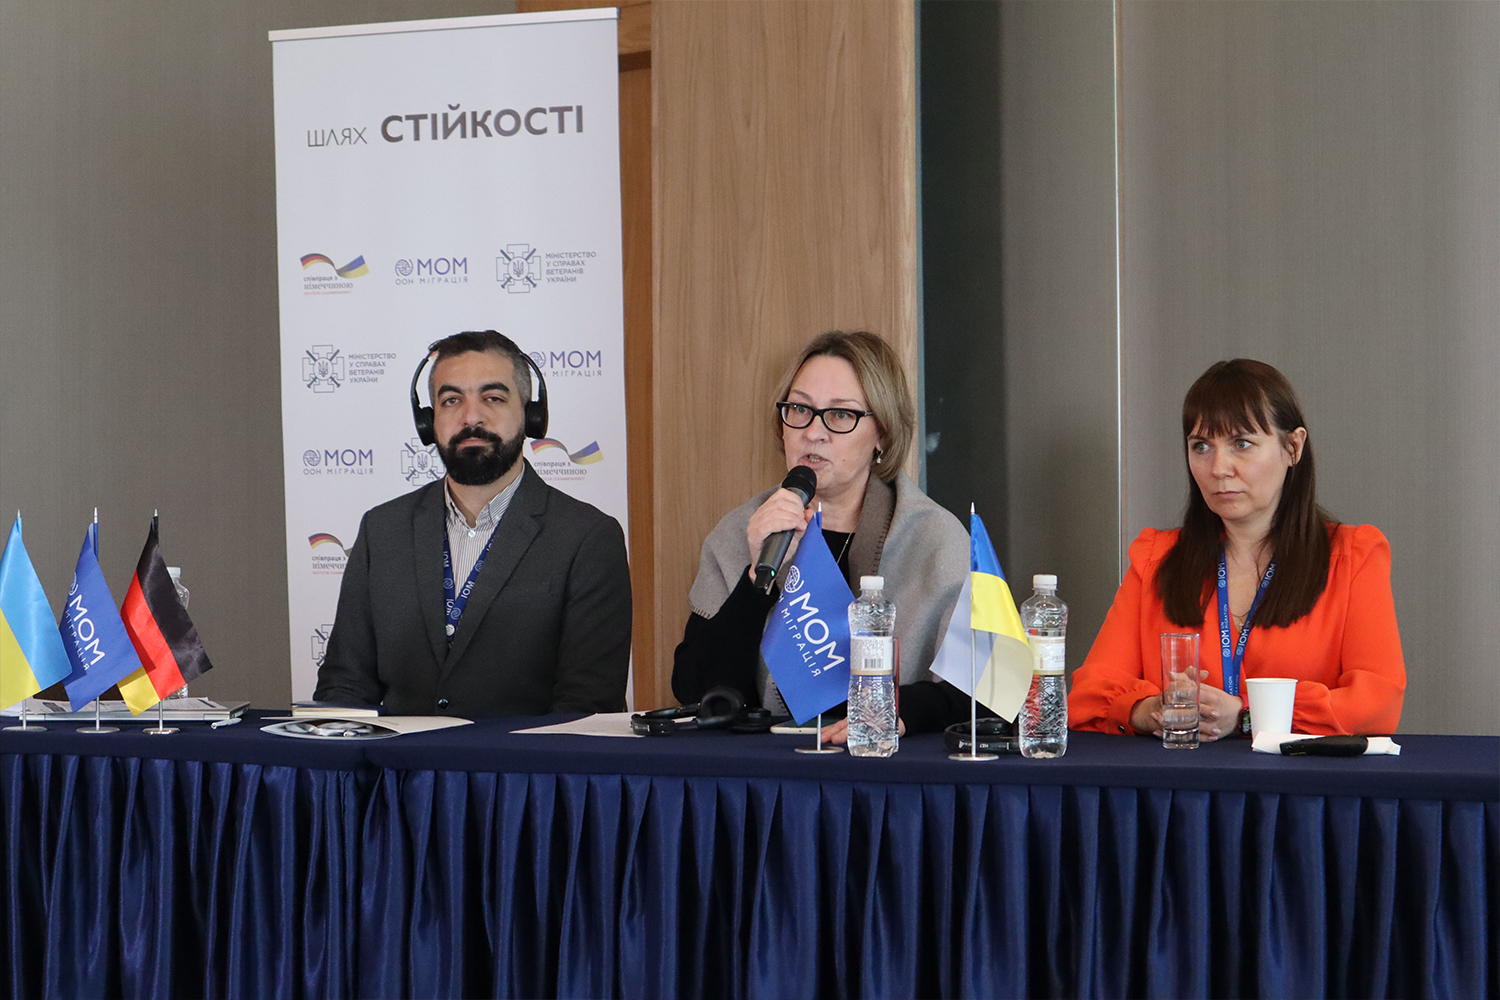 From left to right: IOM Ukraine Psychosocial Project Manager Hatem Marzouk, Head of the Programme Office of the All-Ukrainian Mental Health Programme at the initiative of the First Lady Oksana Zbitnieva, IOM Ukraine National Project Officer Olena Stalnikova. 